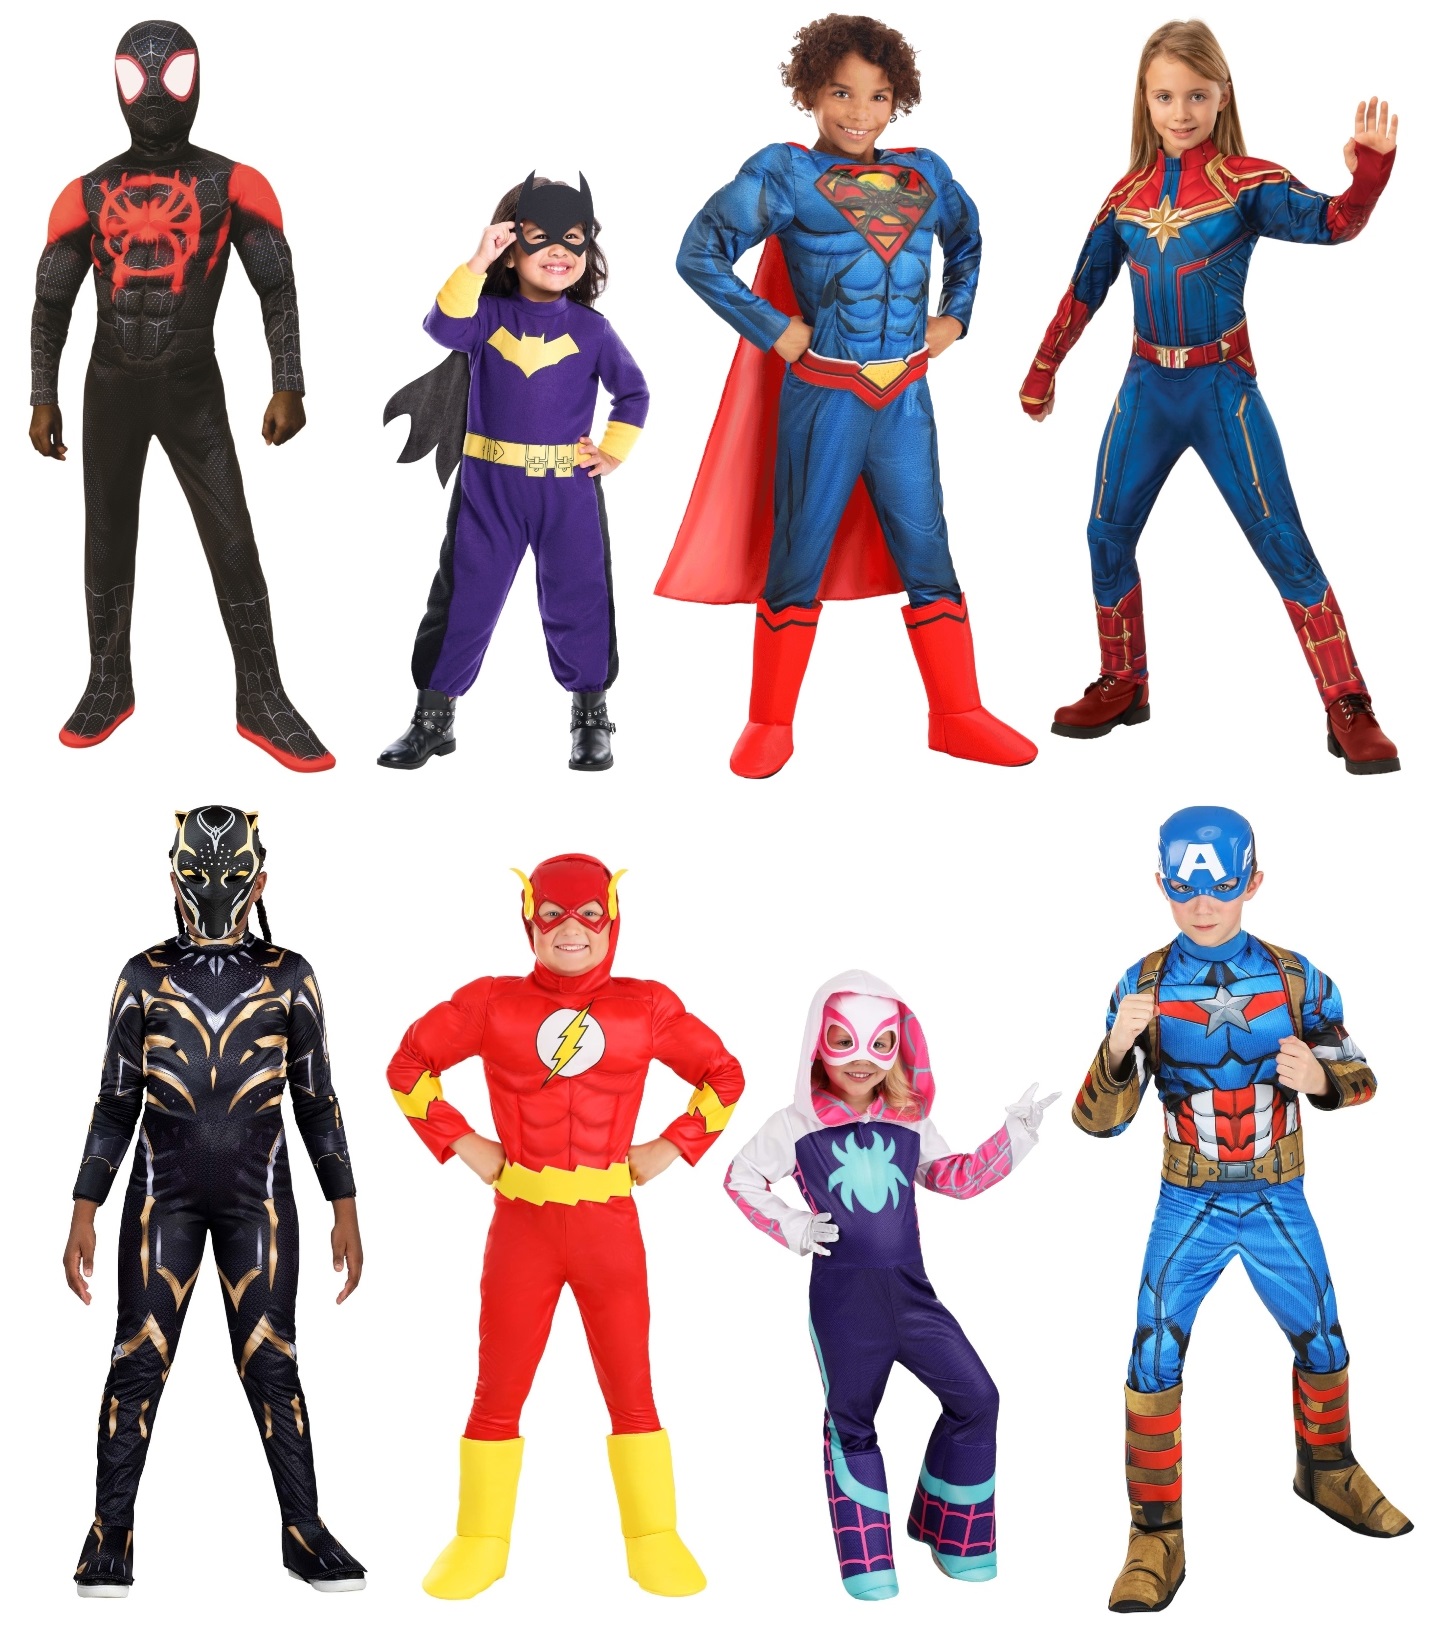 Cold Weather Costumes for Trick-or-Treating - HalloweenCostumes.com Blog